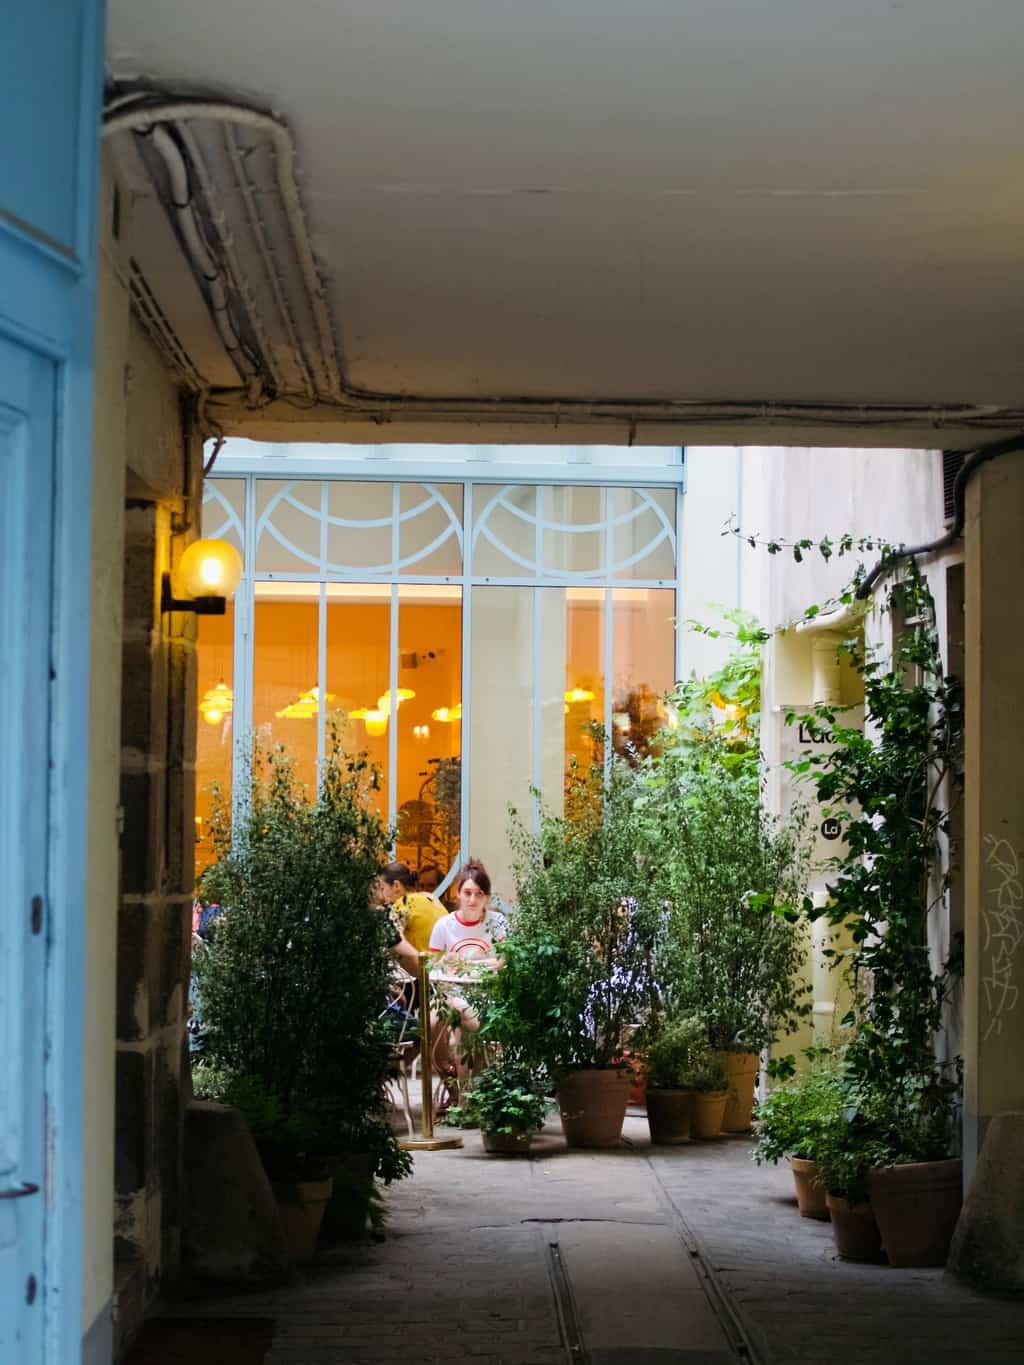 Cafe inspirations: our weekend away in Paris